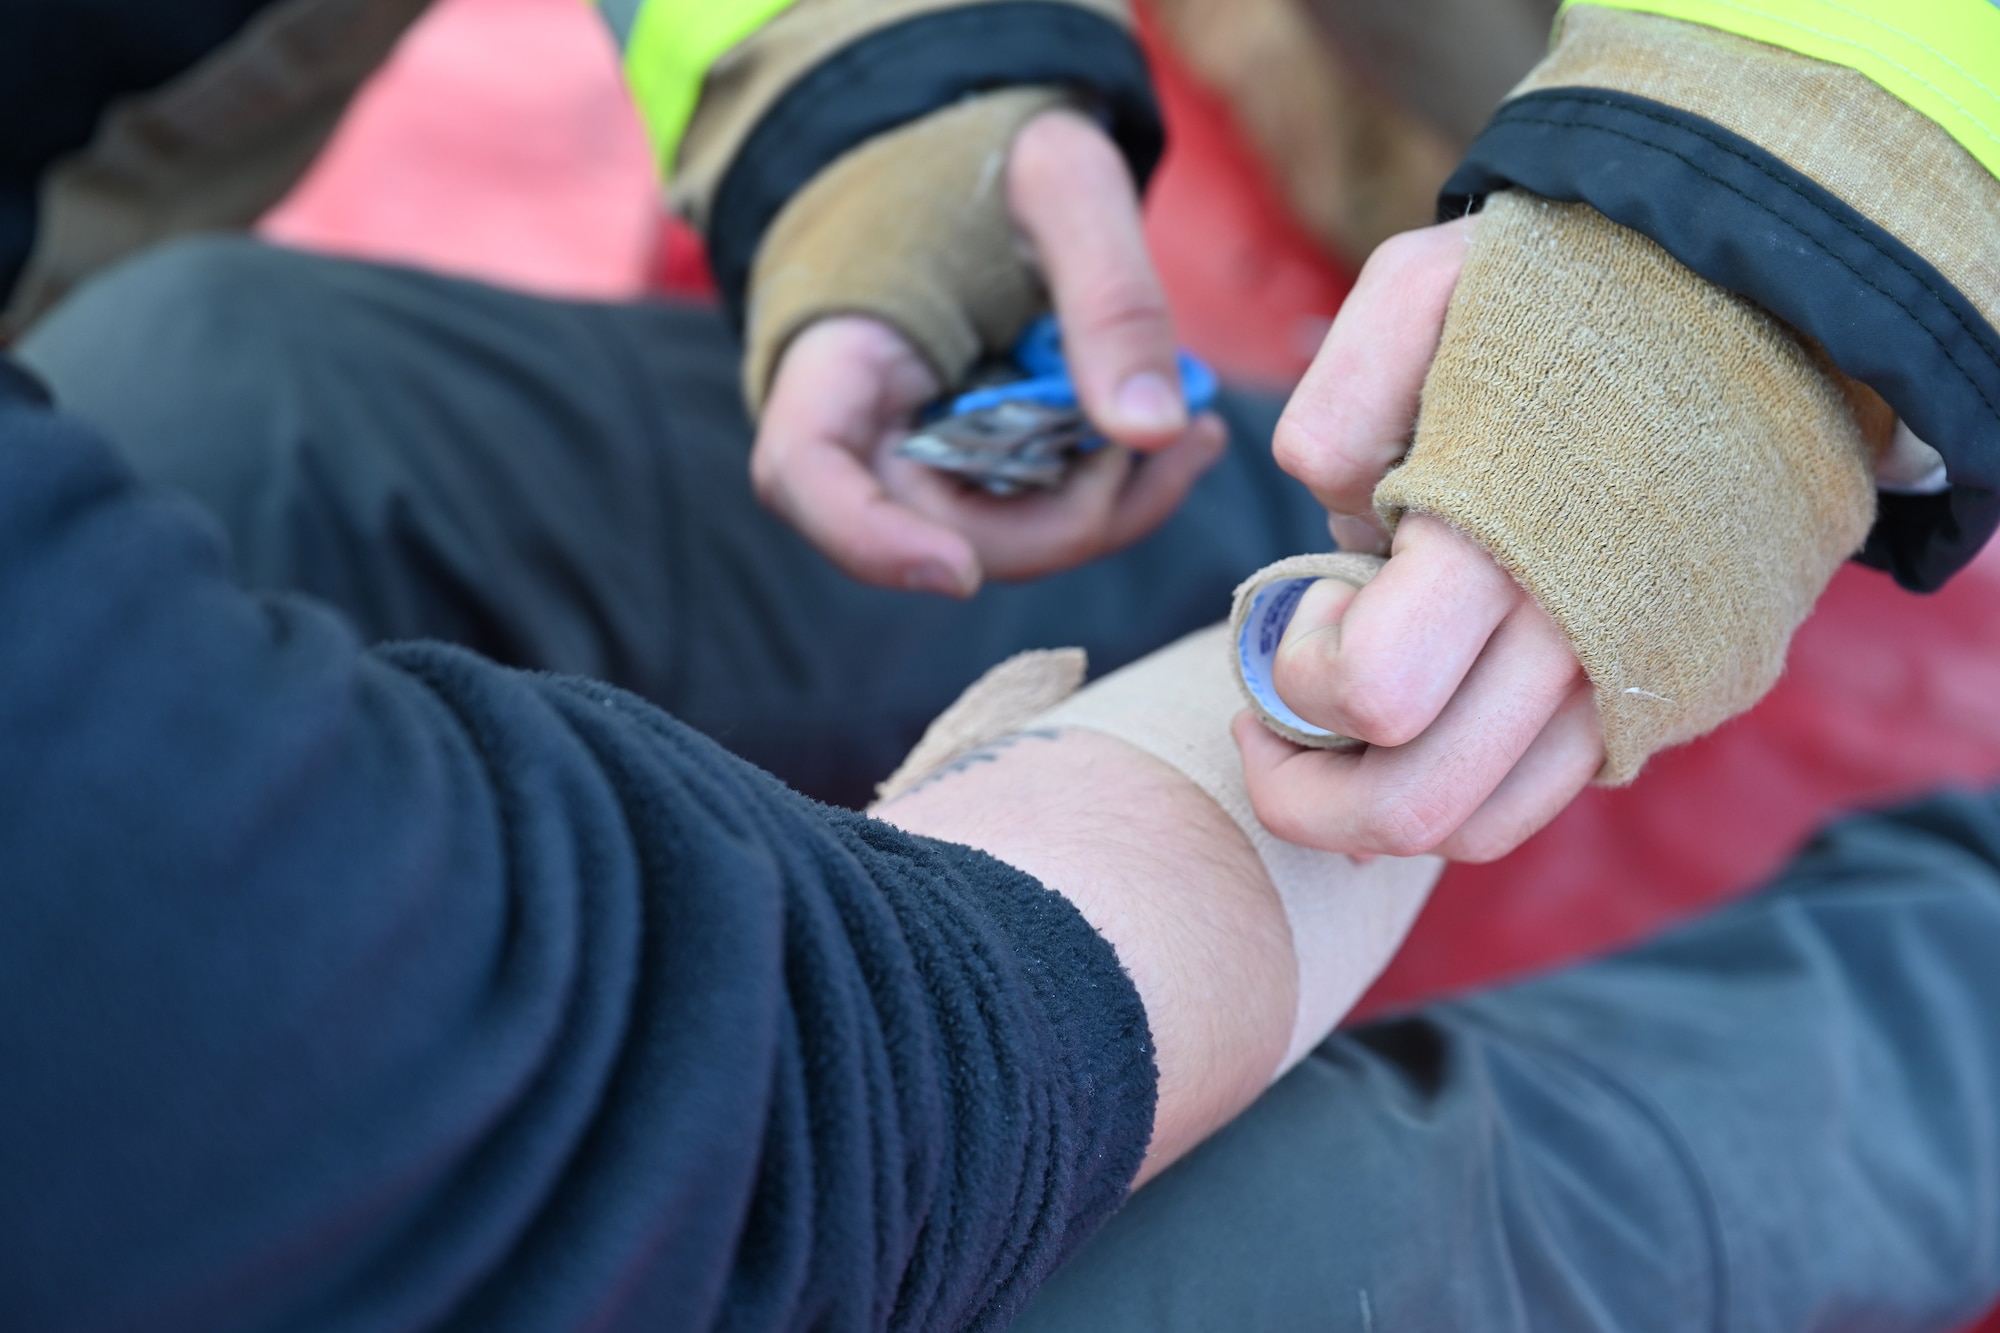 U.S. Air Force Airman 1st Class Jacob Meyer, right, 100th Civil Engineer Squadron Fire Department firefighter, secures a bandage on a simulated casualty during a natural disaster mass care exercise at Royal Air Force Mildenhall, England, Sept. 21, 2023. During the exercise scenario, firefighters and 100th Security Forces Squadron defenders performed search and rescue operations, and ensured mock casualties were safe and cared for. (U.S. Air Force photo by Karen Abeyasekere)